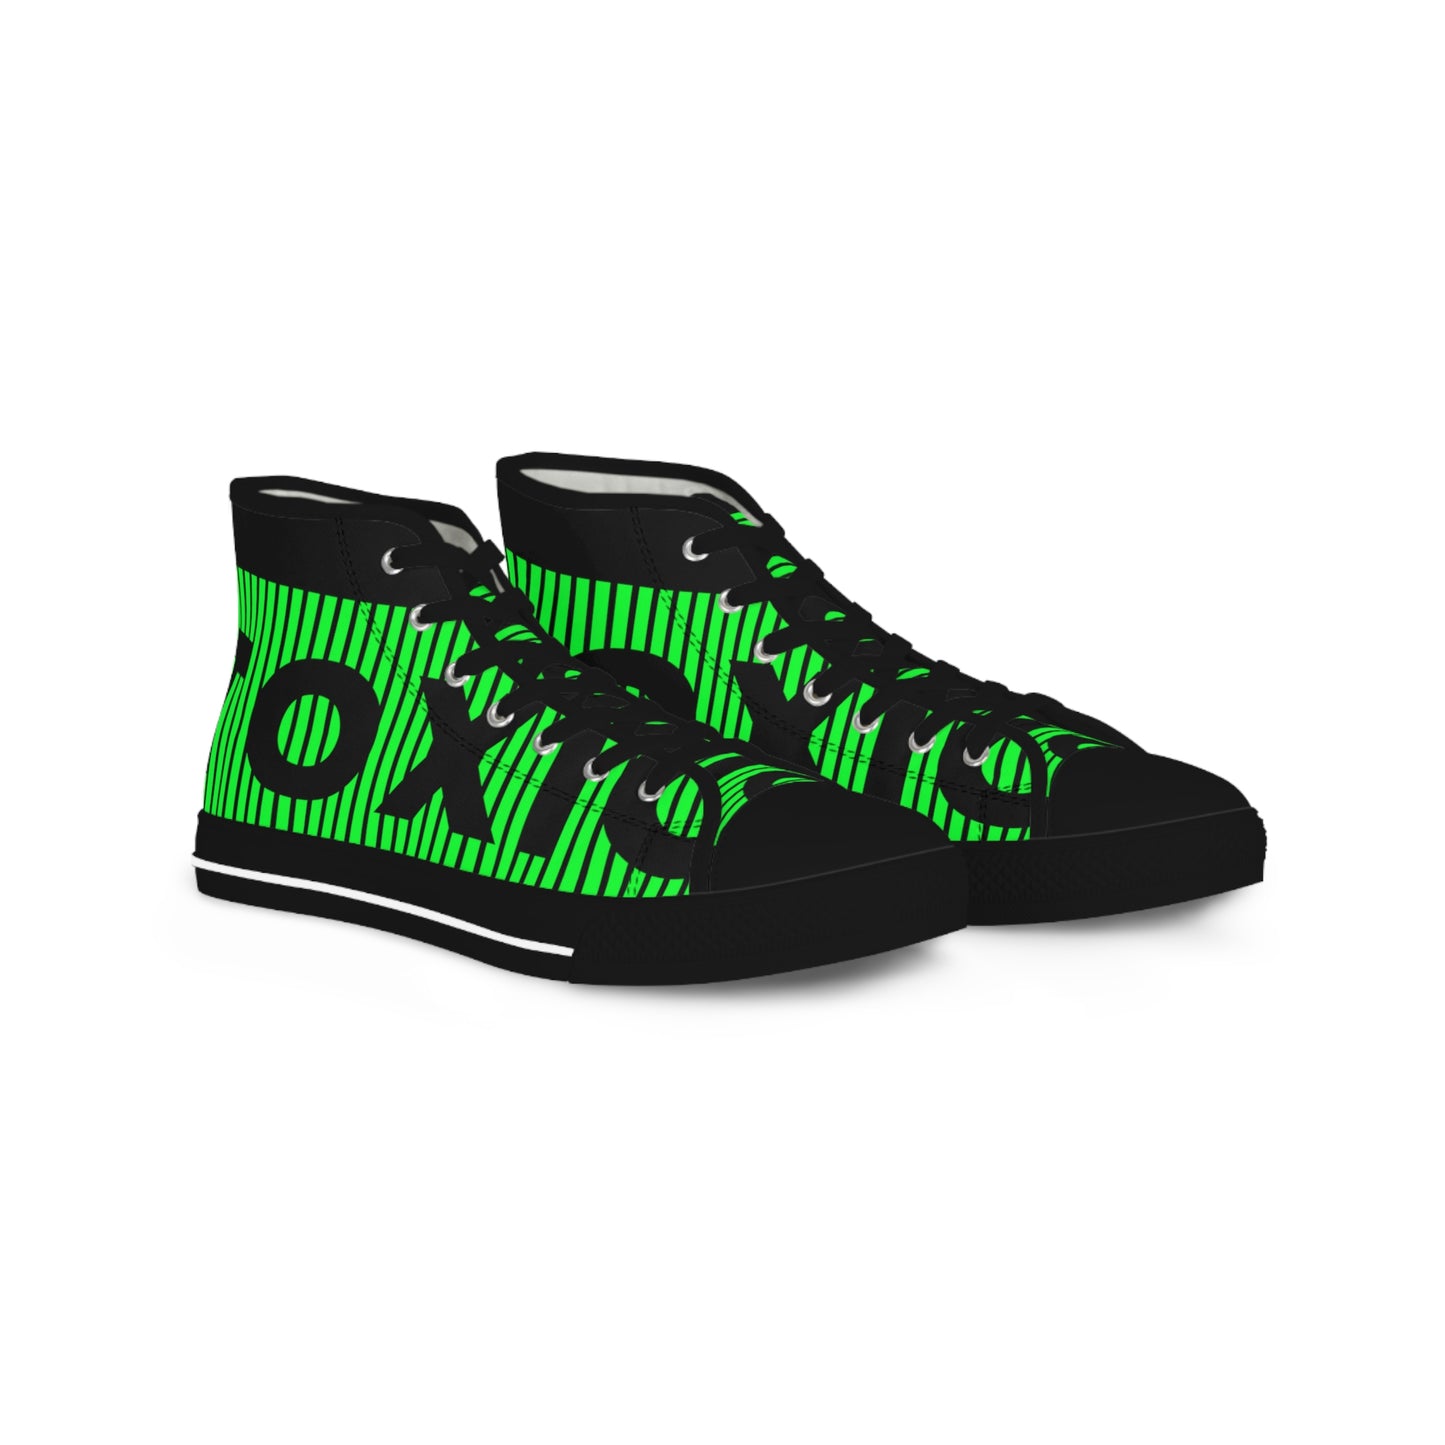 Limited Edition High Top Sneakers - TOXIC